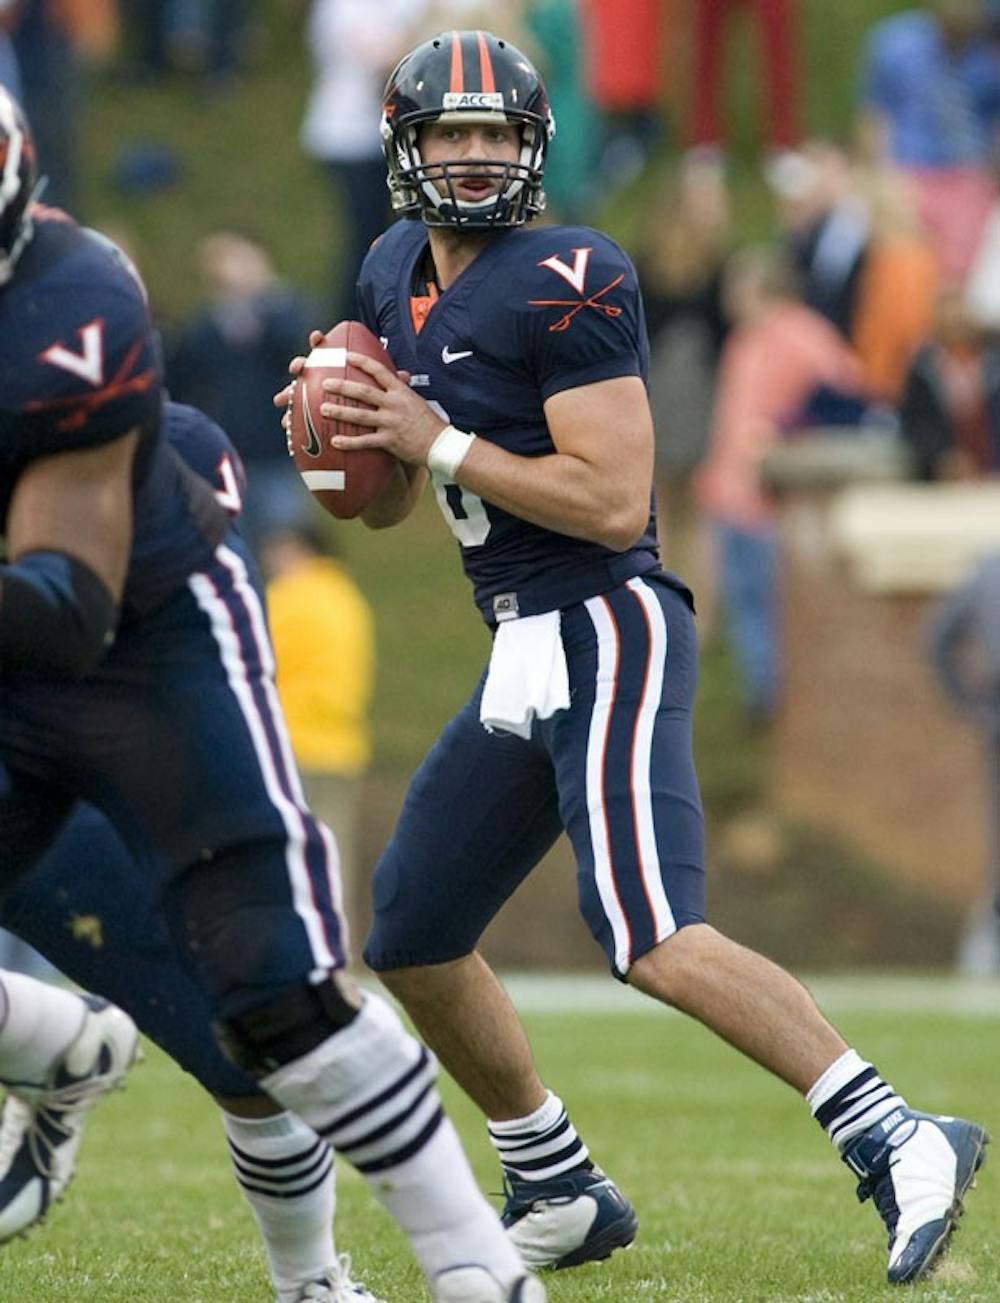 Virginia quarterback Marc Verica (6) stepped into the game for Jameel Sewell after a brief injury. The Duke Blue Devils triumphed over the Cavaliers for the second year in a row 28-17 in Scott Stadium, located in Charlottesville VA on October 31, 2009.